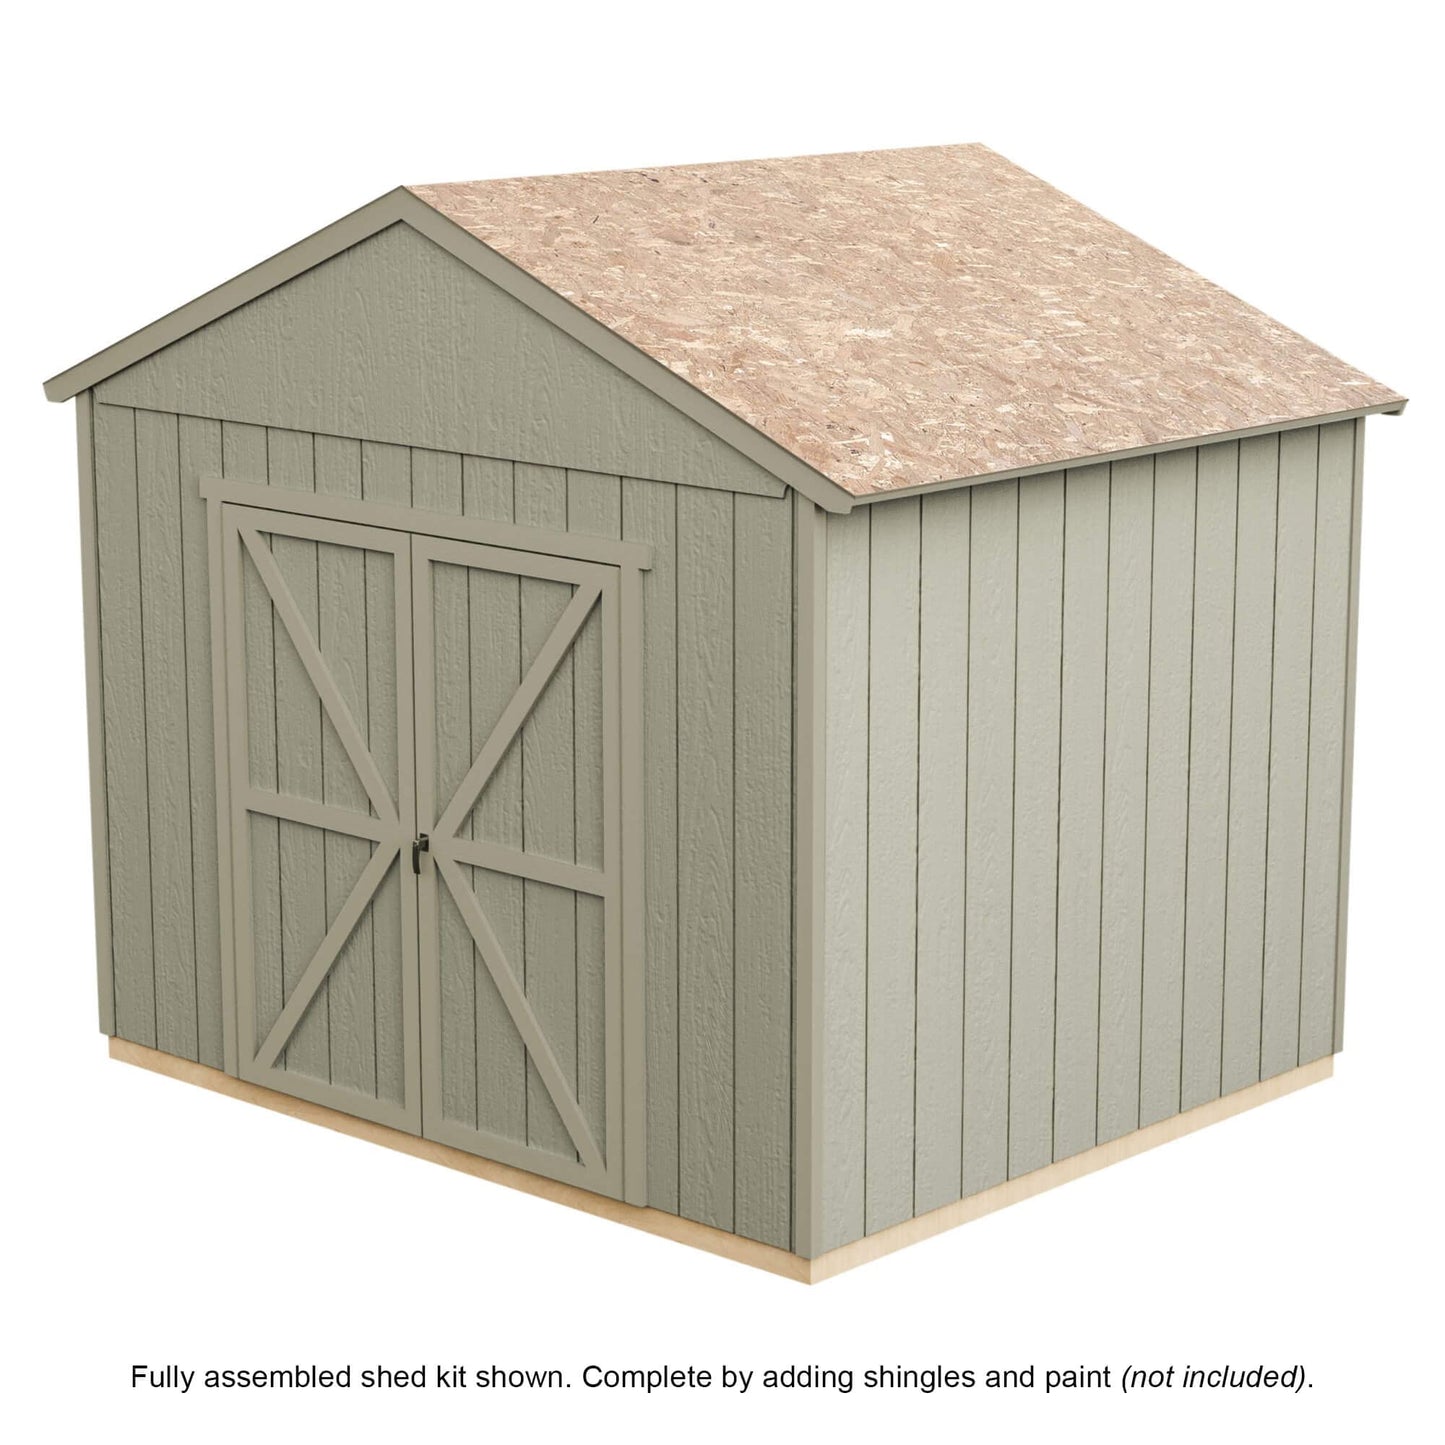 Handy Home Products Rookwood 10 X 8 Do-it-Yourself Wooden Storage Shed Brown 10x8 Without Floor